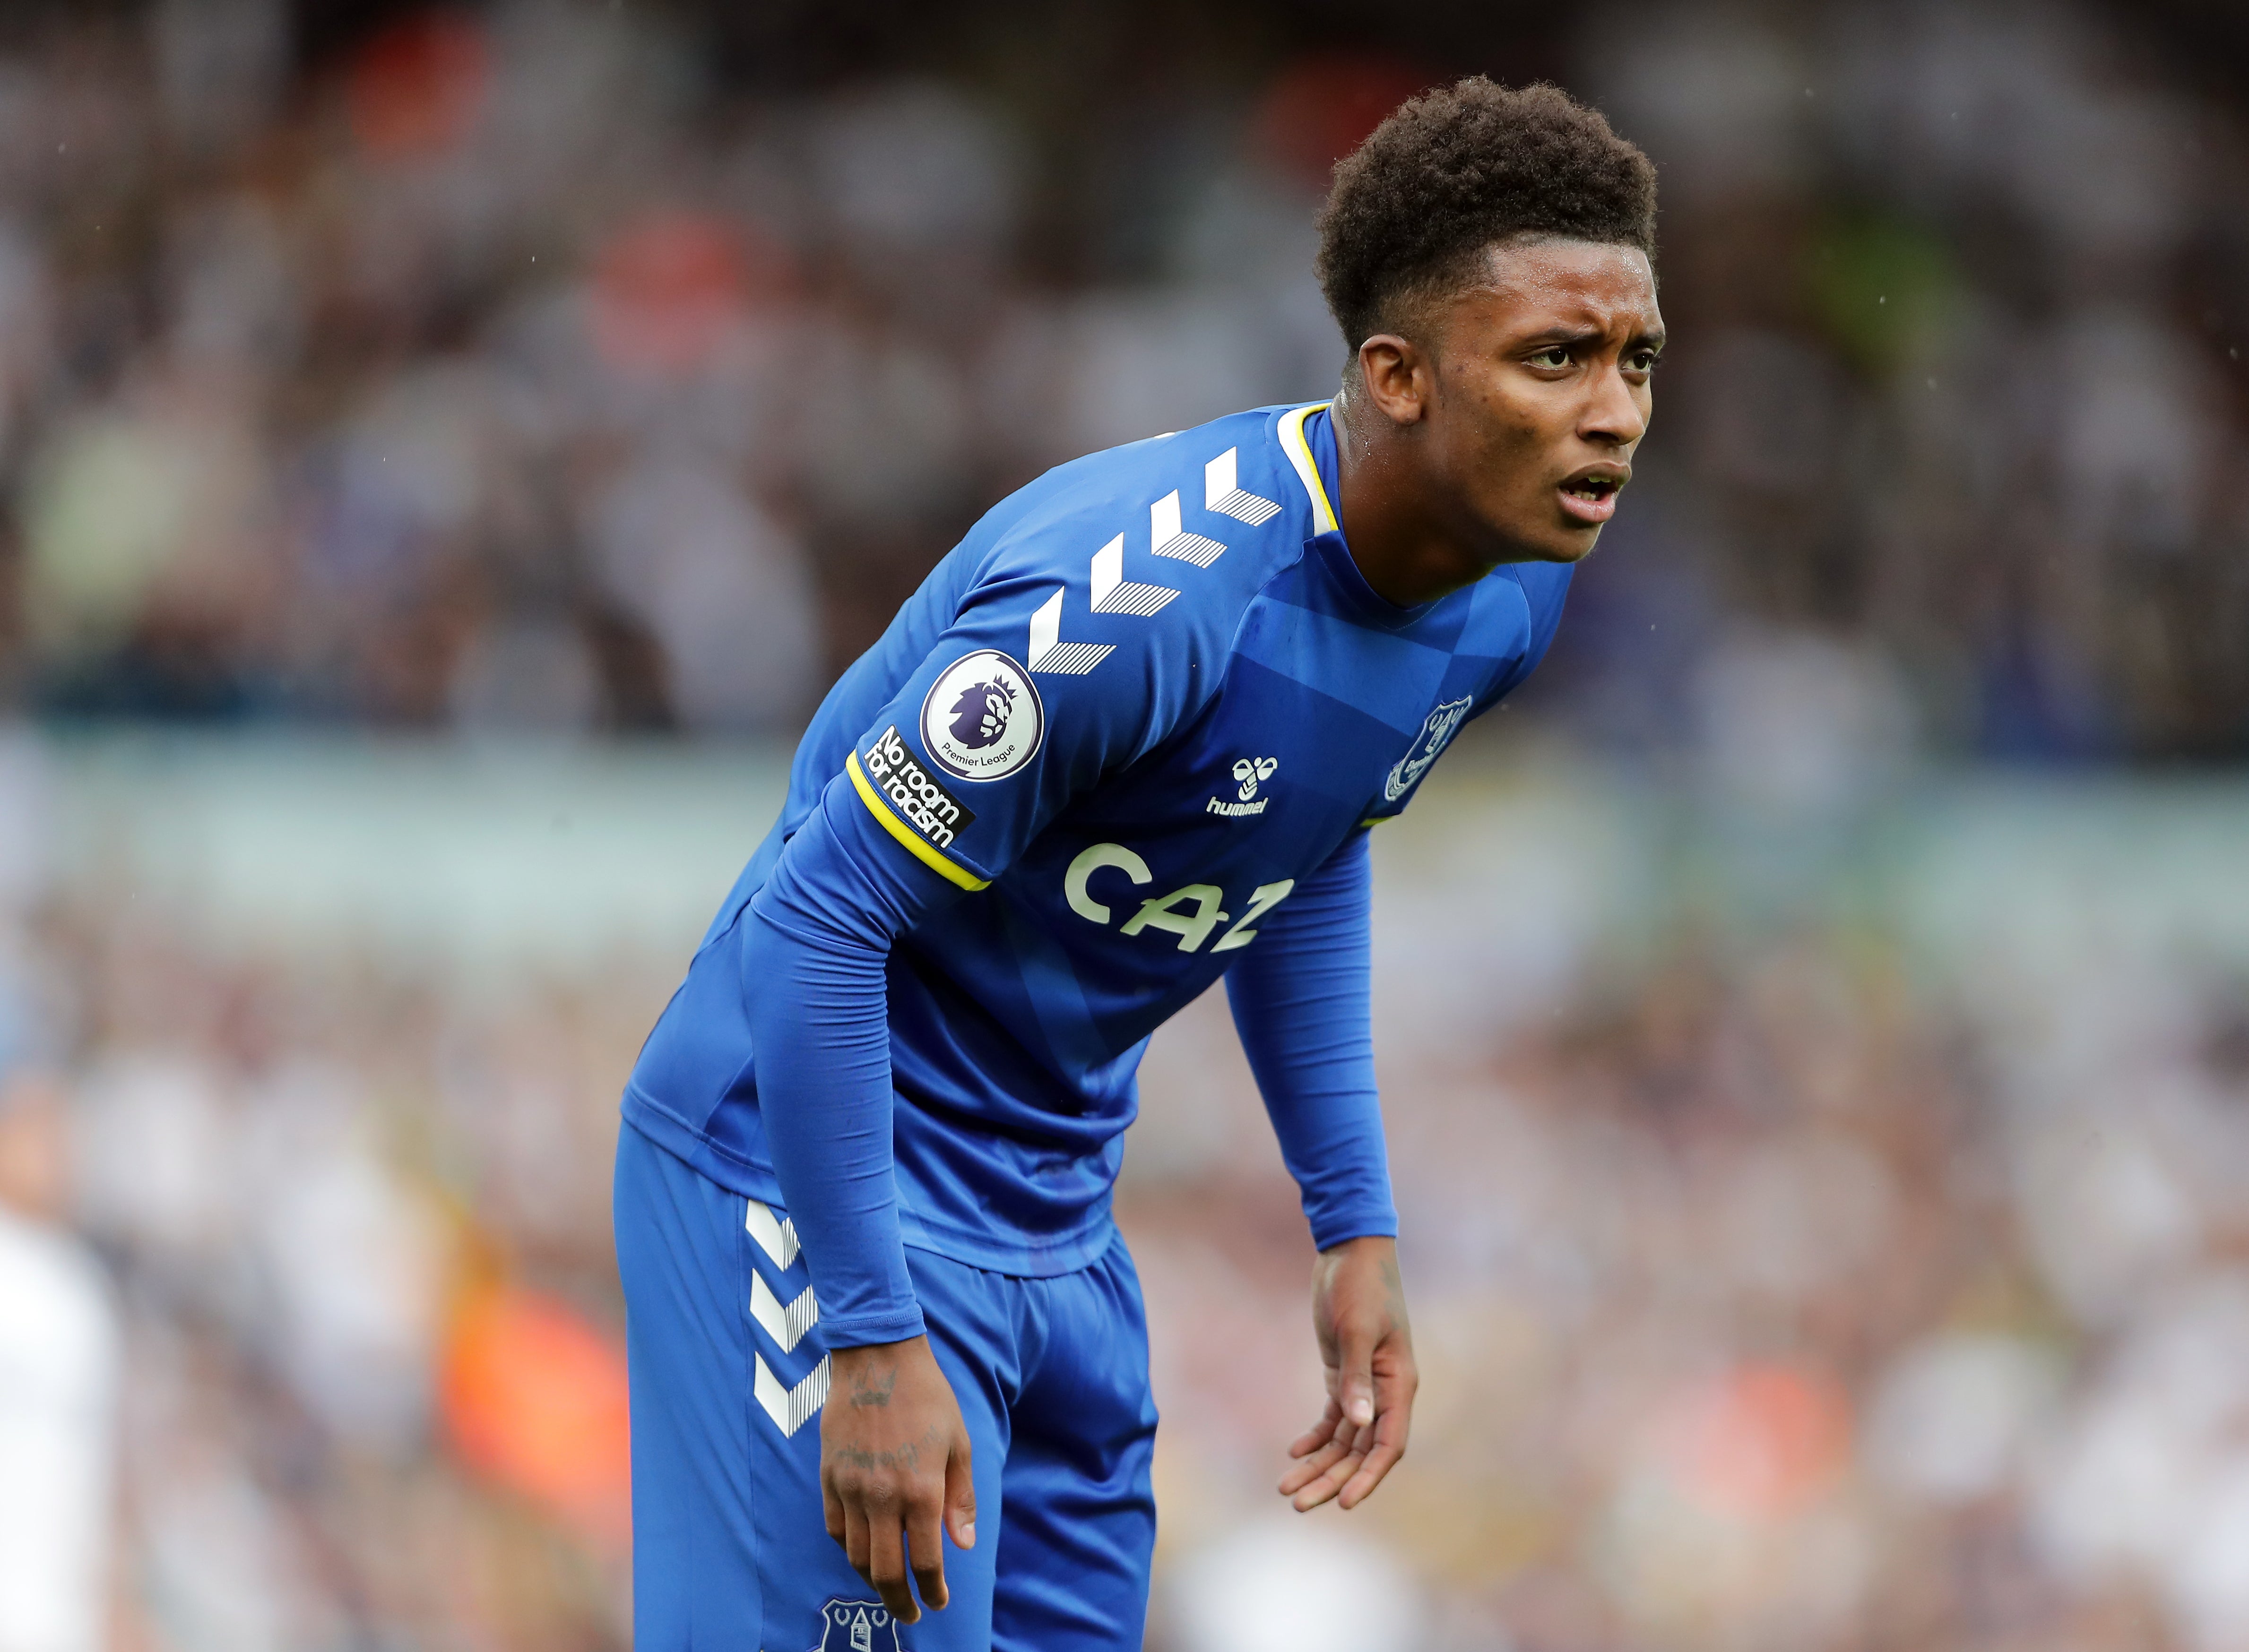 Demarai Gray, pictured, had been on Rafael Benitez’s radar for some time (Richard Sellers/PA)